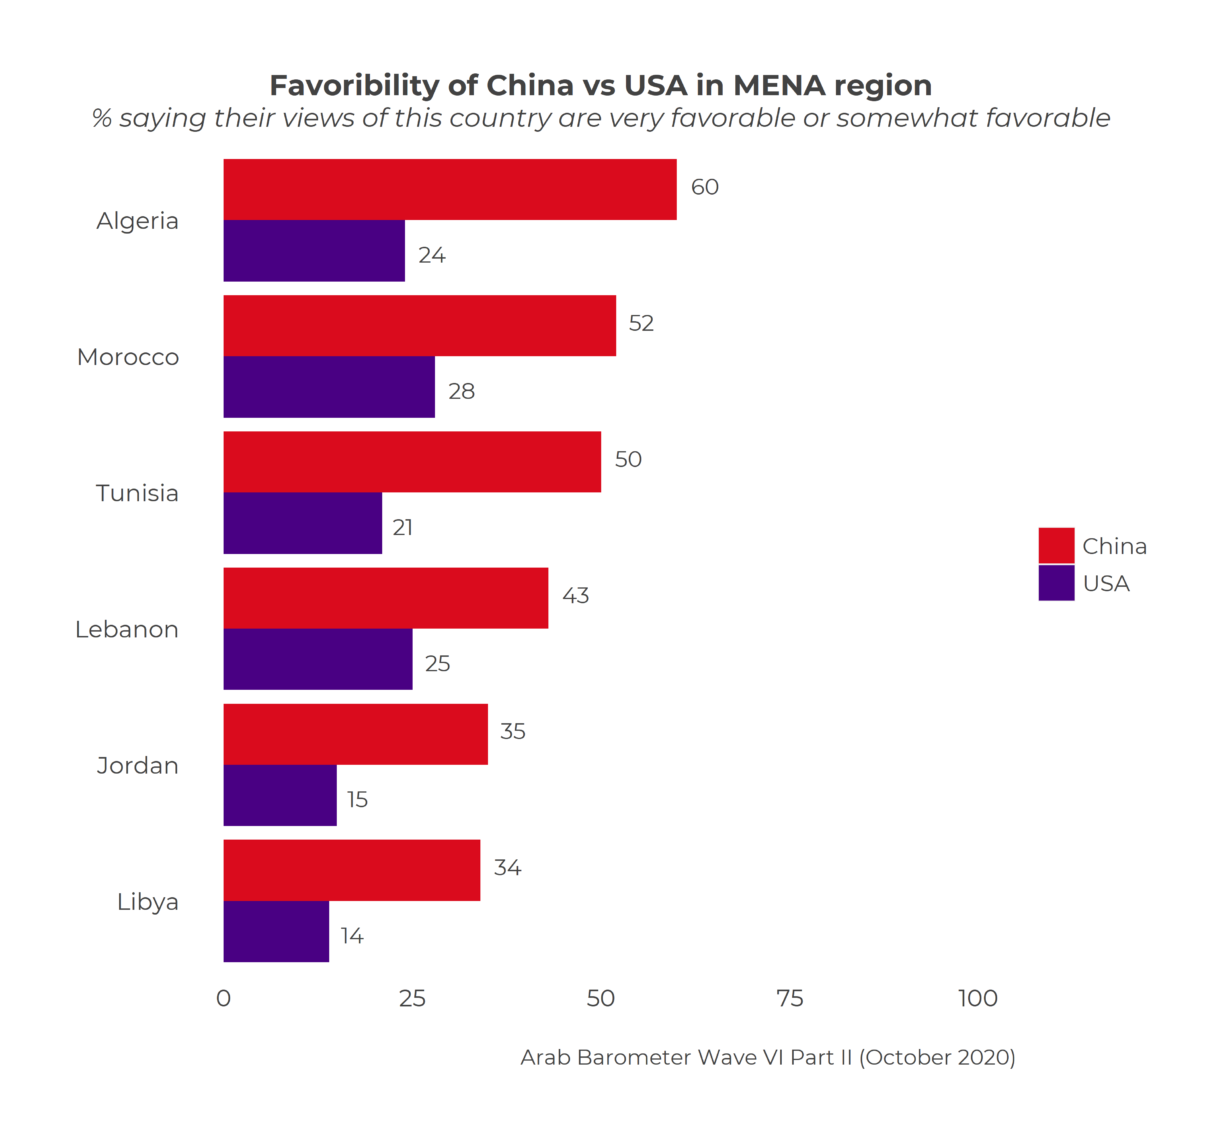 U.S. & China’s competition extends to MENA